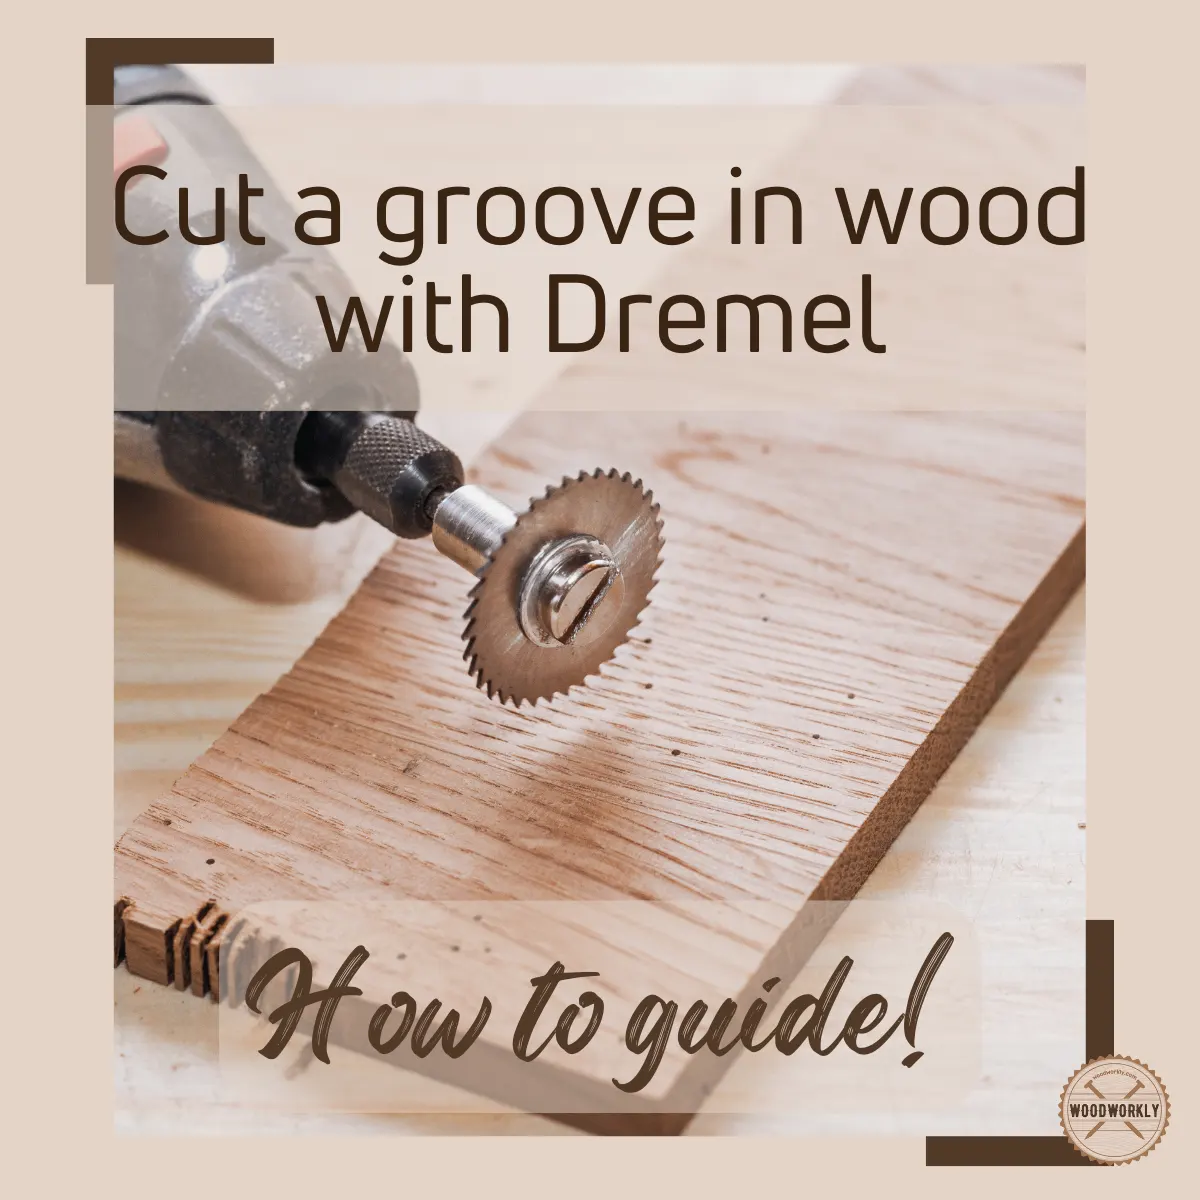 Step-by-step guide to cutting a groove with a drill